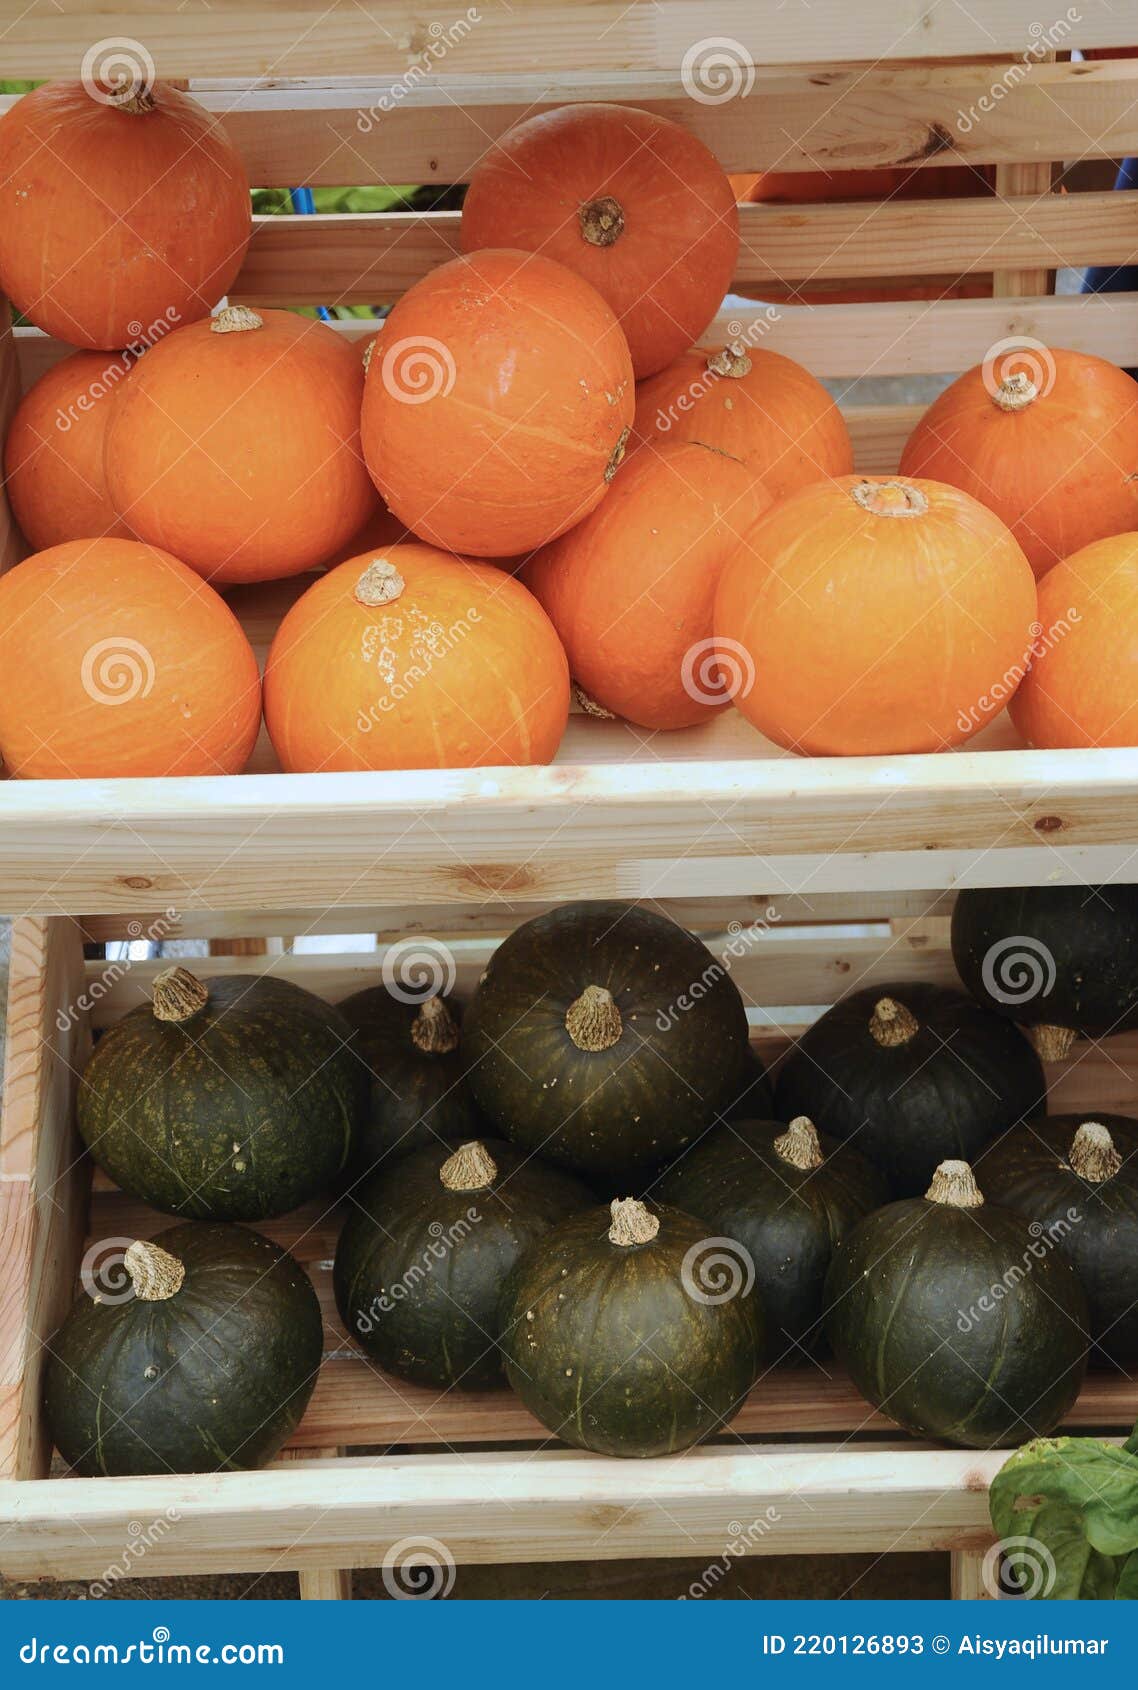 cantaloupe or rock melon fruit or the scientific name is cucumis melo var. cantalupo.